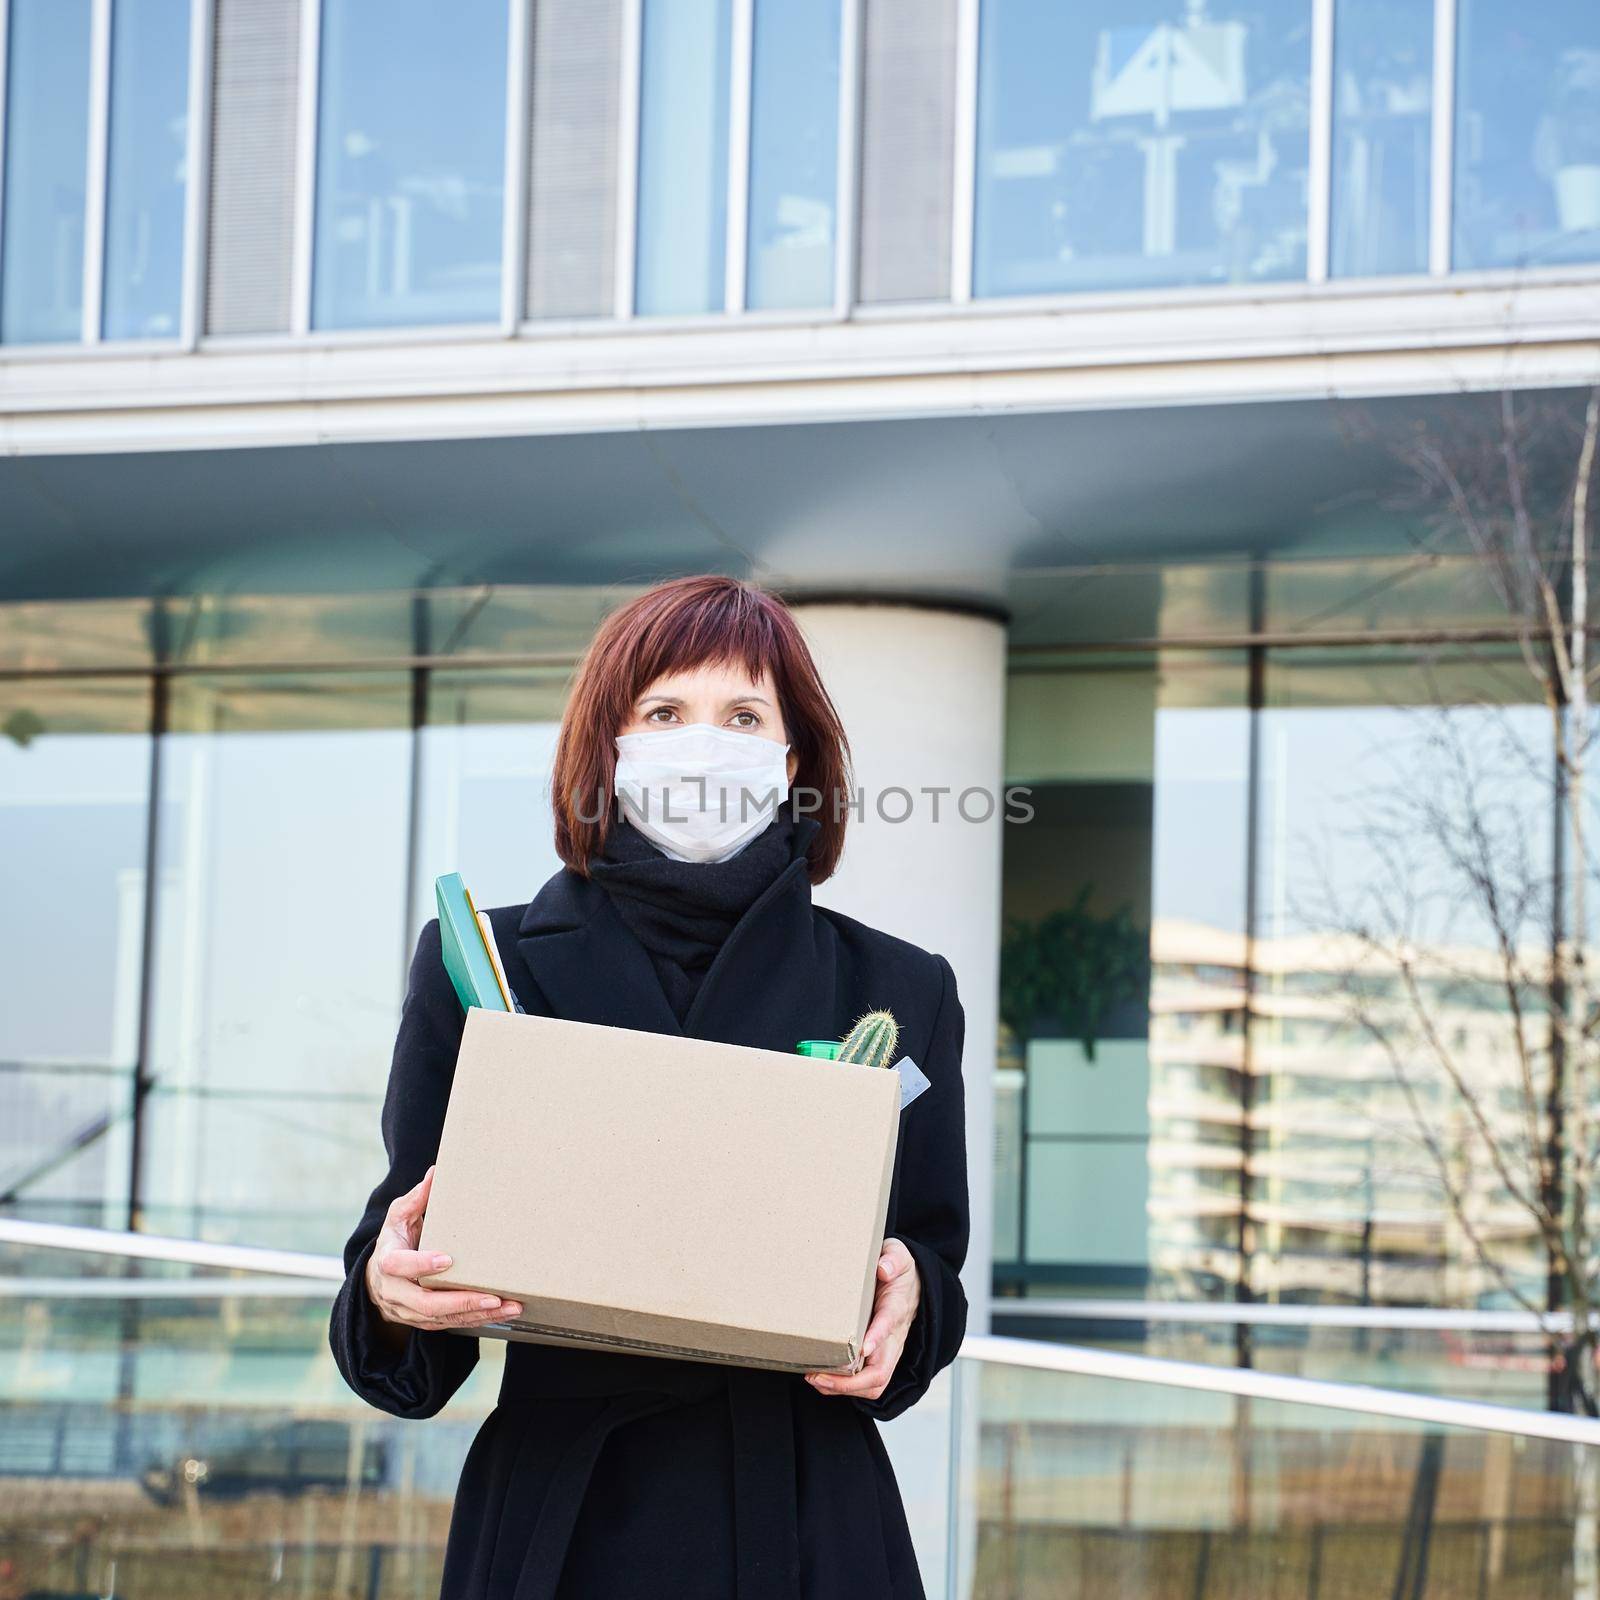 Concept of job loss due to the COVID-19 virus pandemic. Woman in mask with box of his things by NataBene